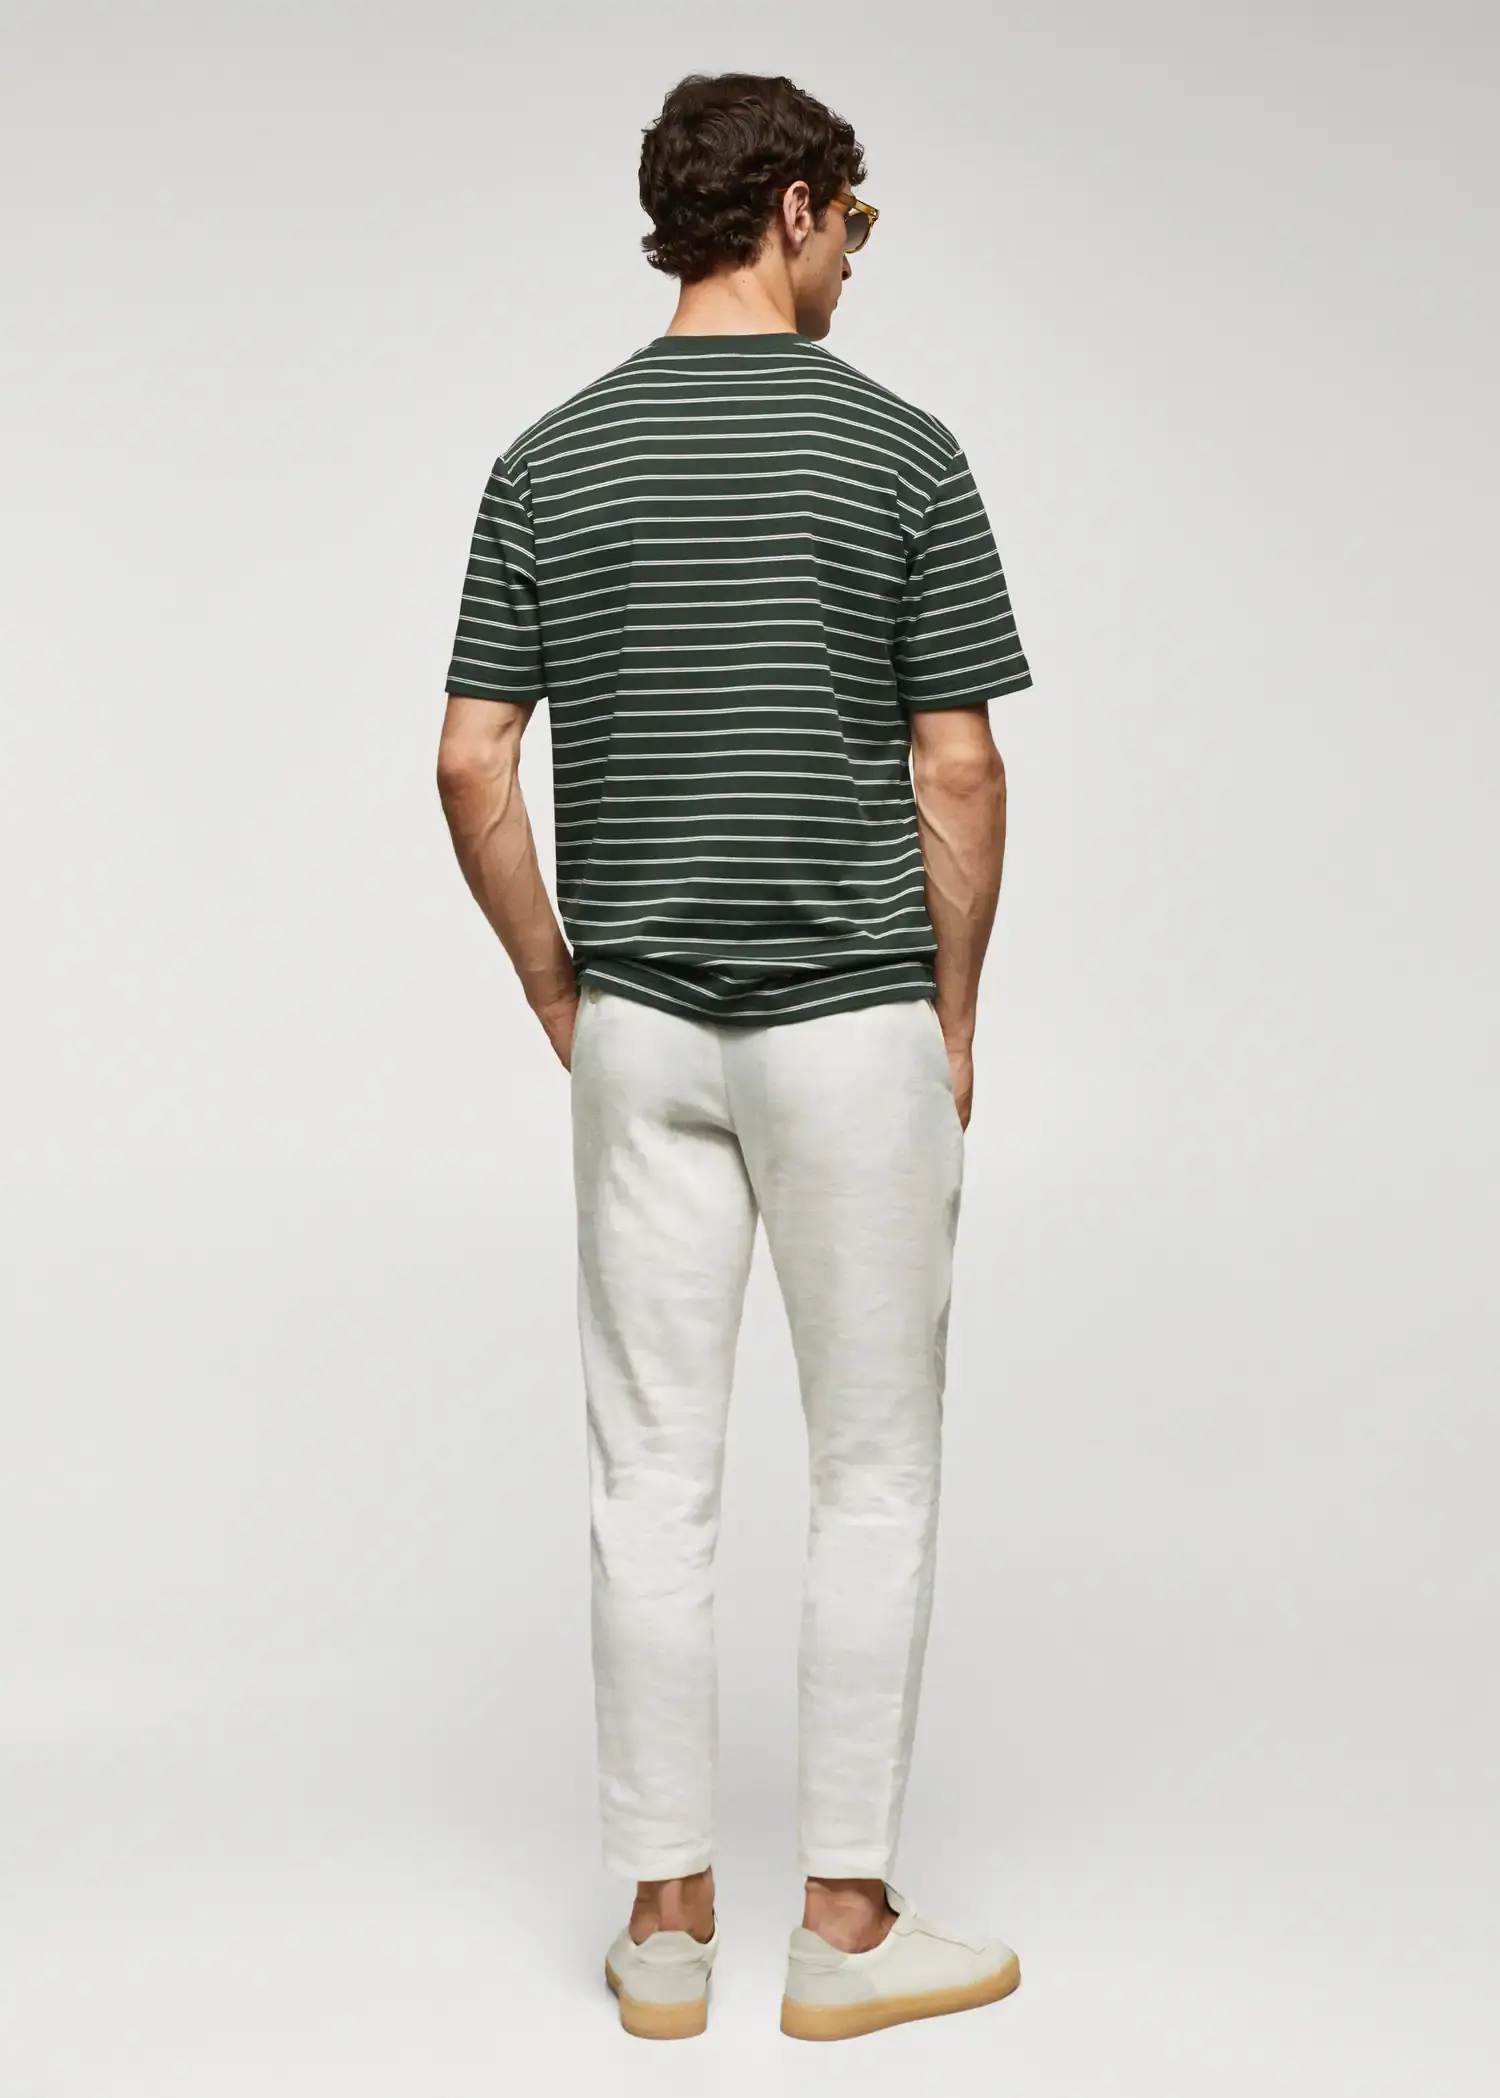 Mango Striped 100% cotton t-shirt. a man standing with his hands in his pockets. 